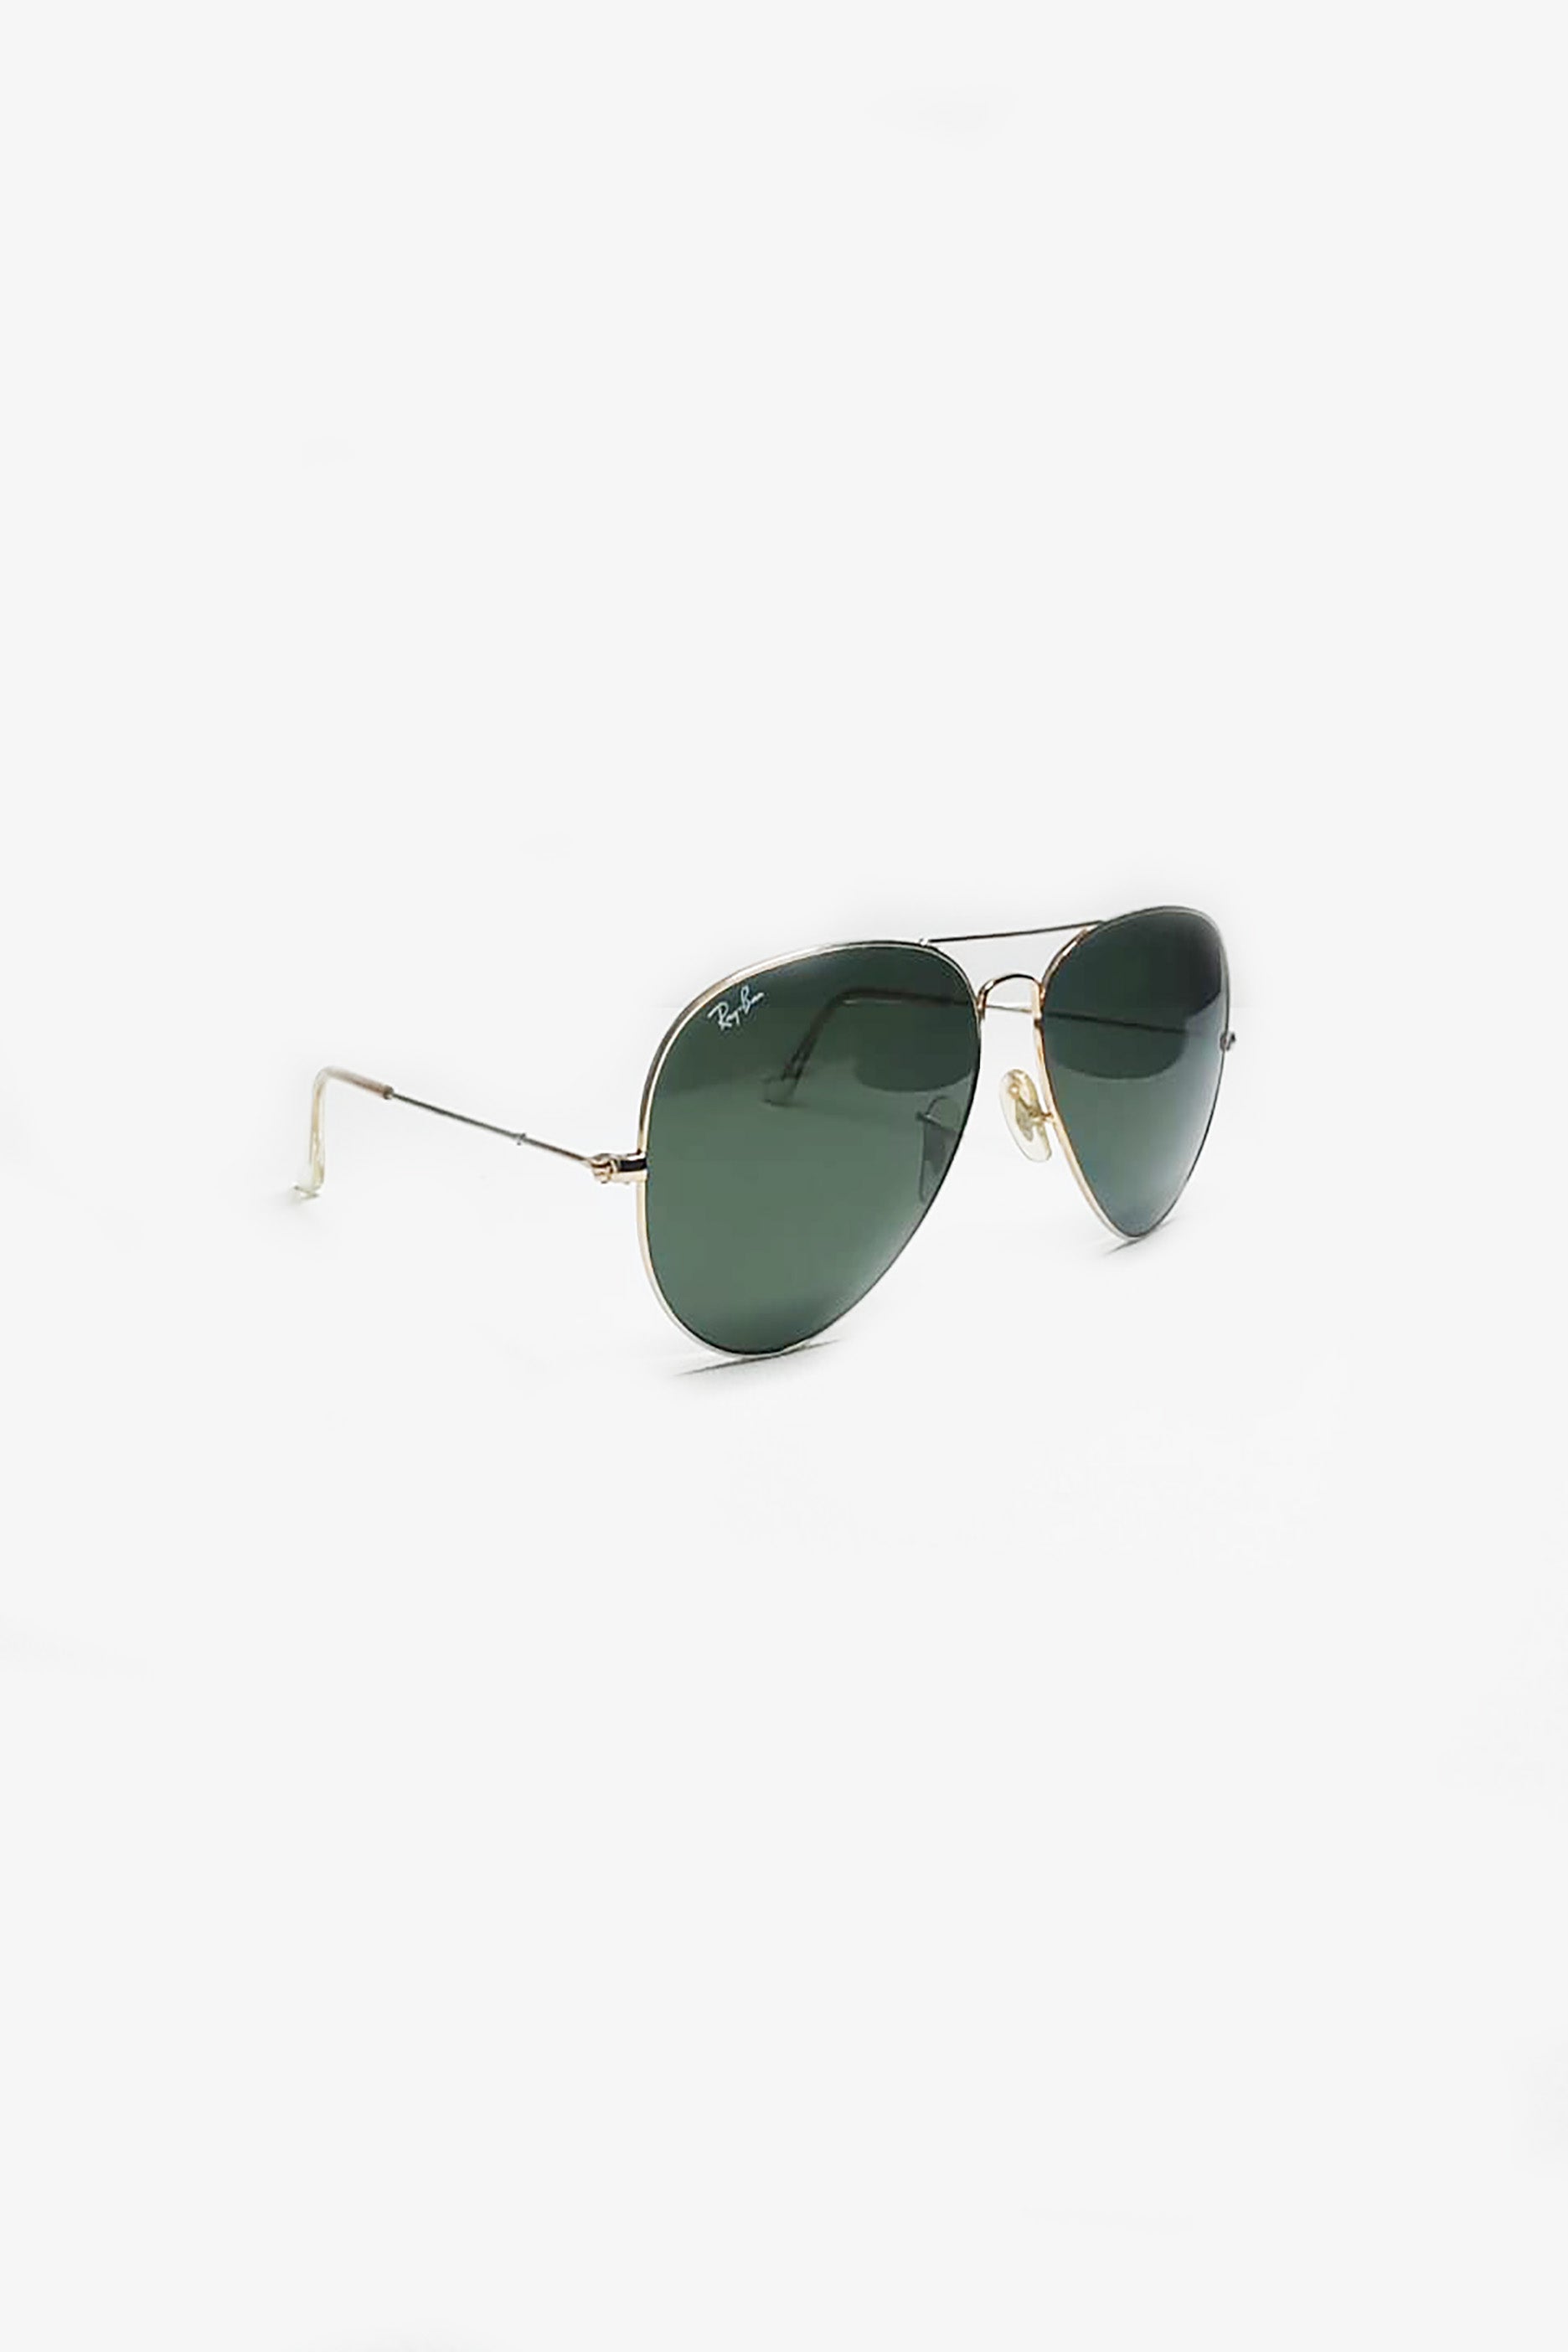 Gold Aviator Sunglasses with Green Tint